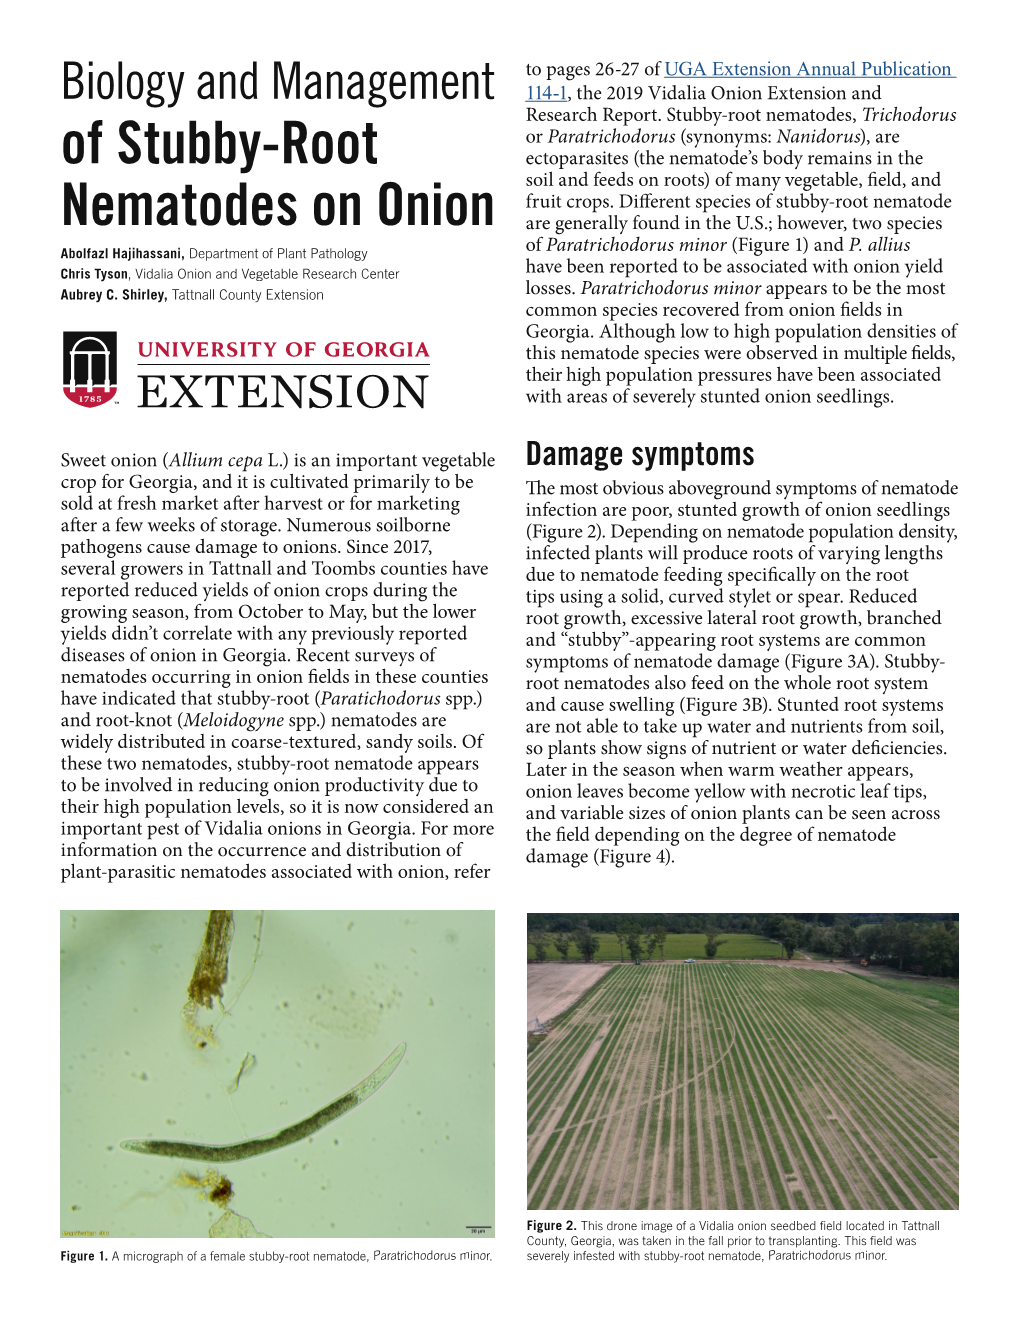 Of Stubby-Root Nematodes on Onion 2 Can Travel to the Upper Soil Layers